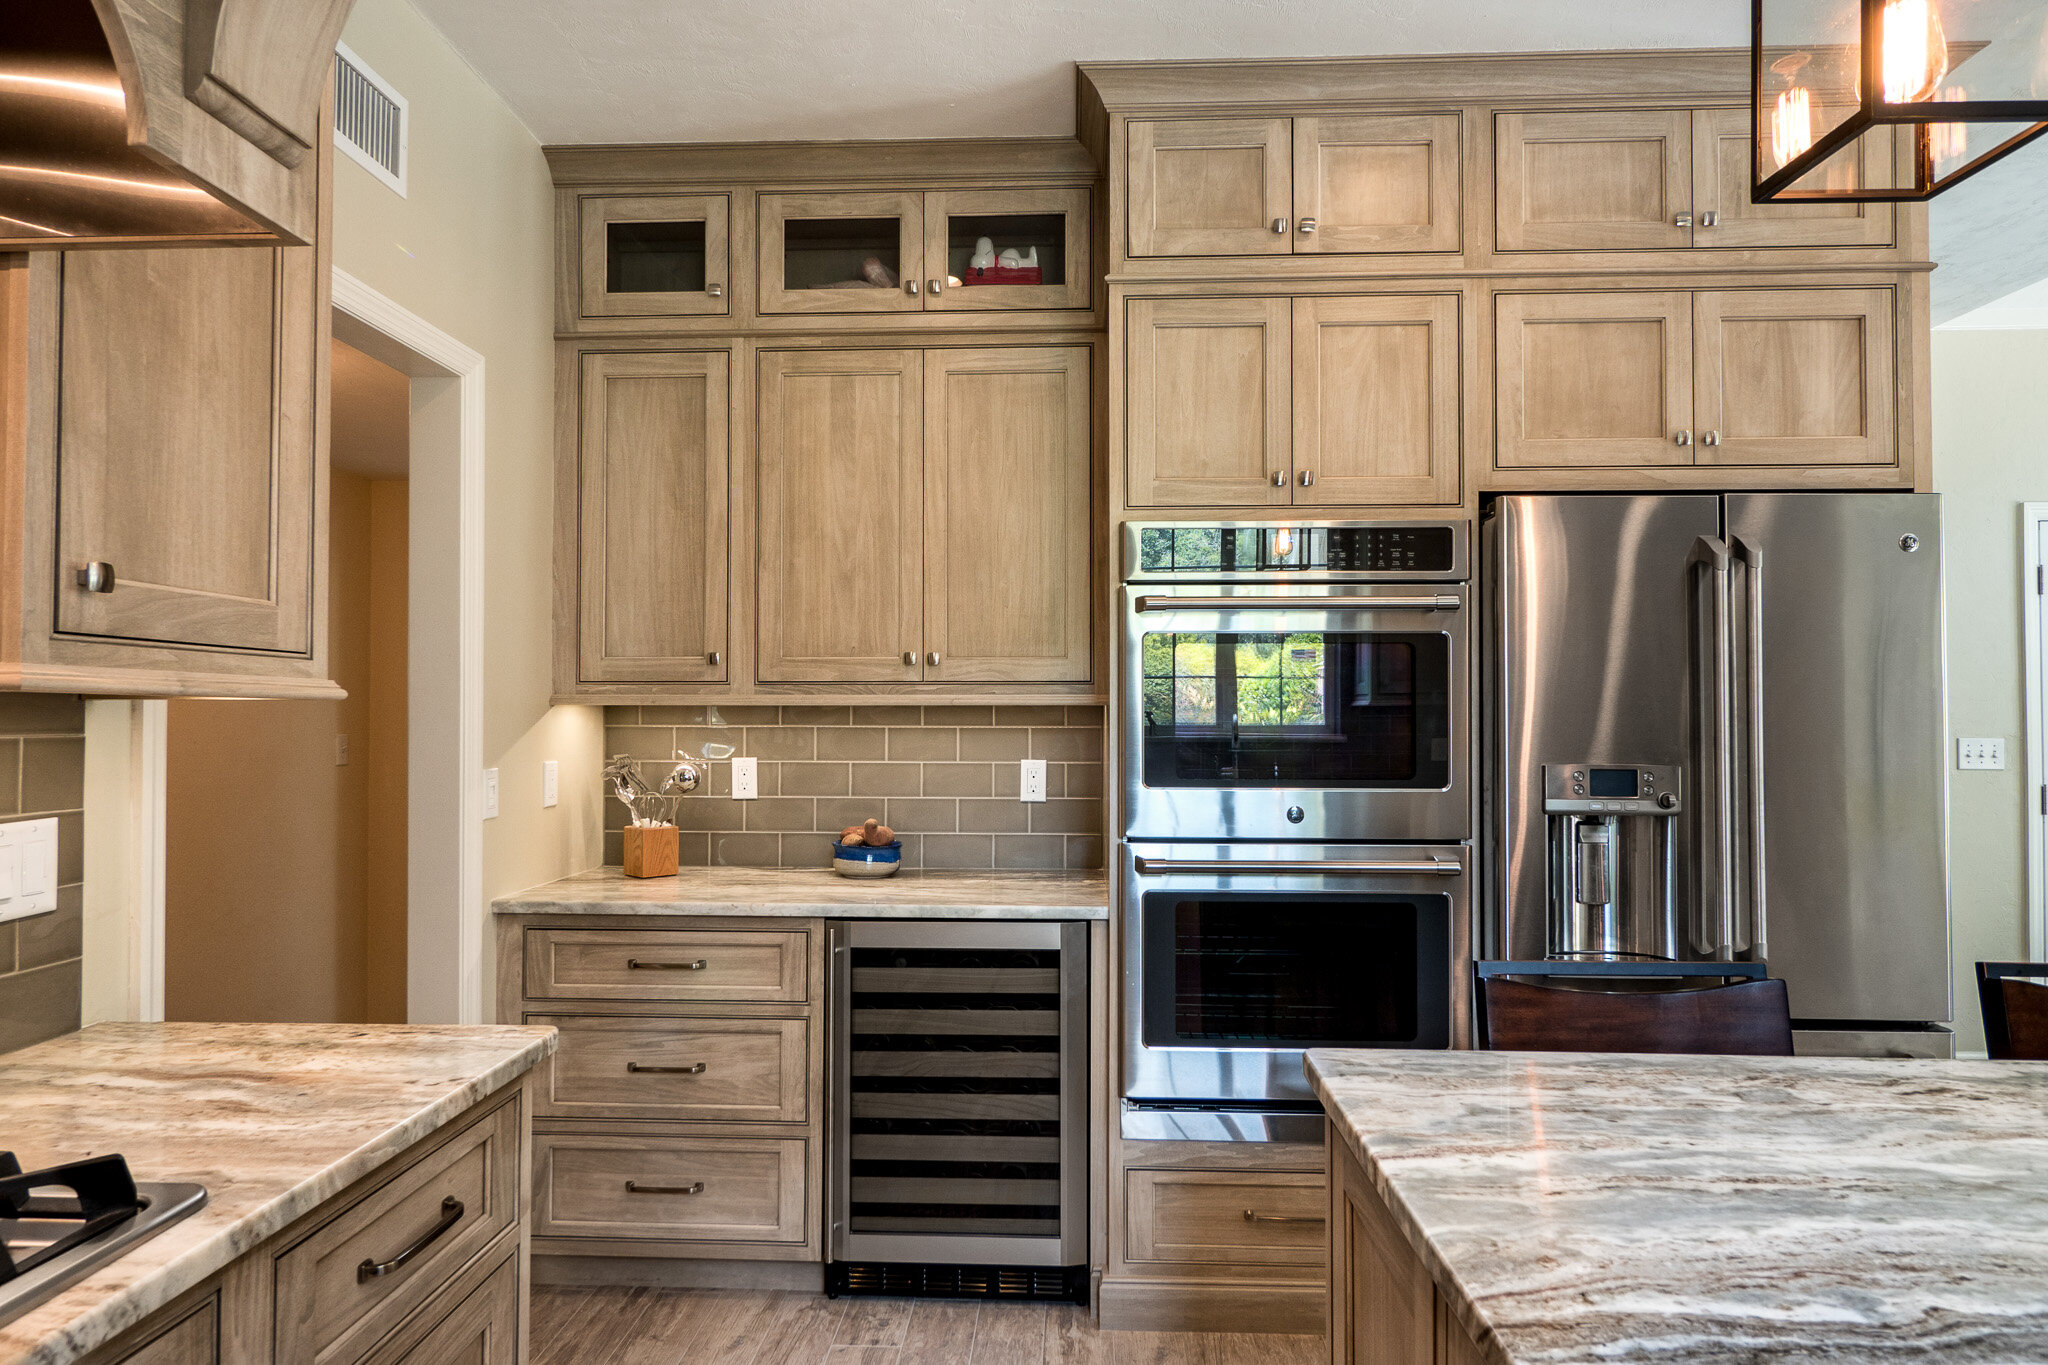 kitchen design with wood finish cabinets